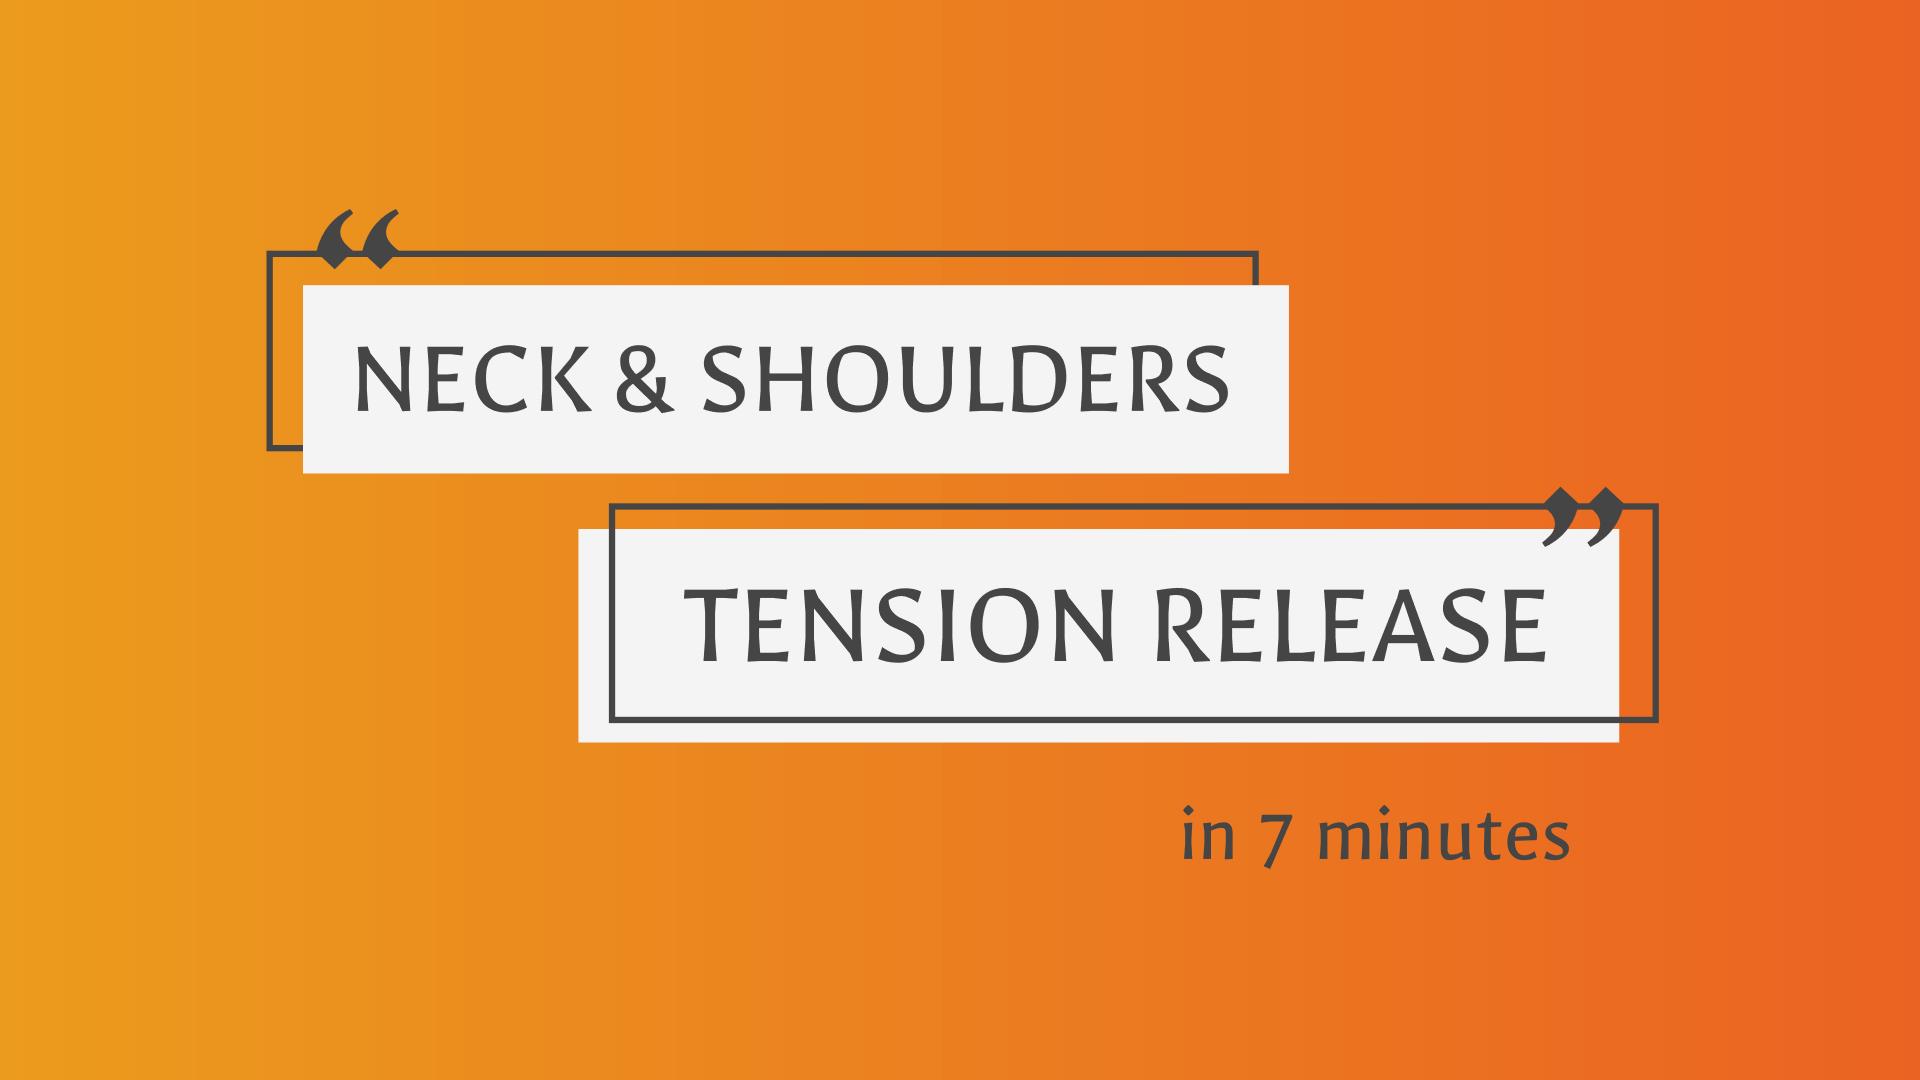 Neck&Shoulders Release 7 minutes by TaijiStream